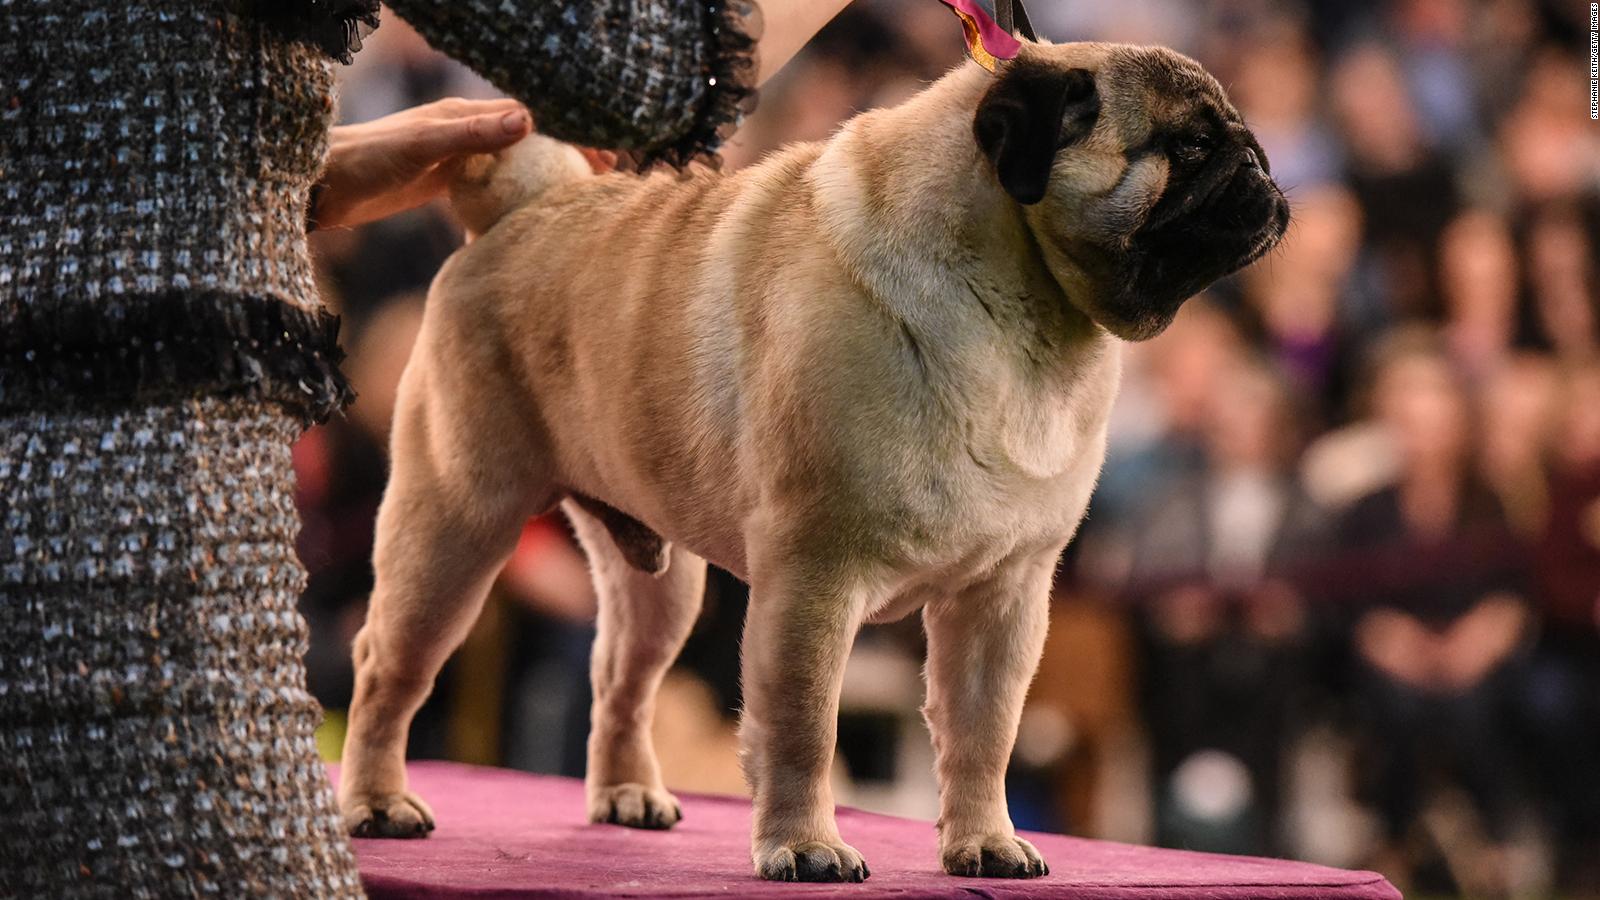 Westminster Dog Show: Time, schedule and what you need to know - CNN